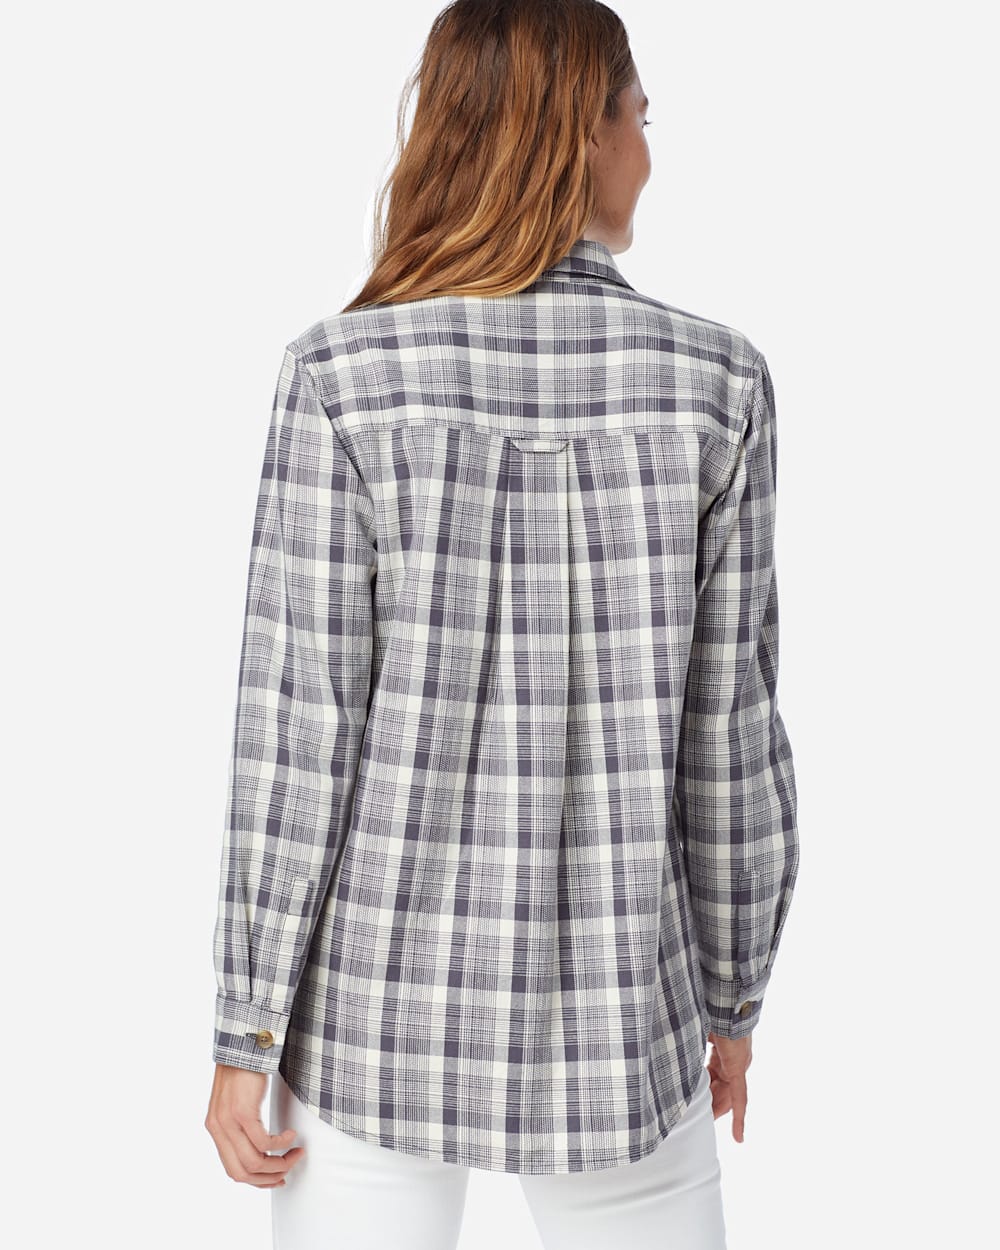 WOMEN'S BEACH SHACK SHIRT IN IVORY/NAVY PLAID image number 4